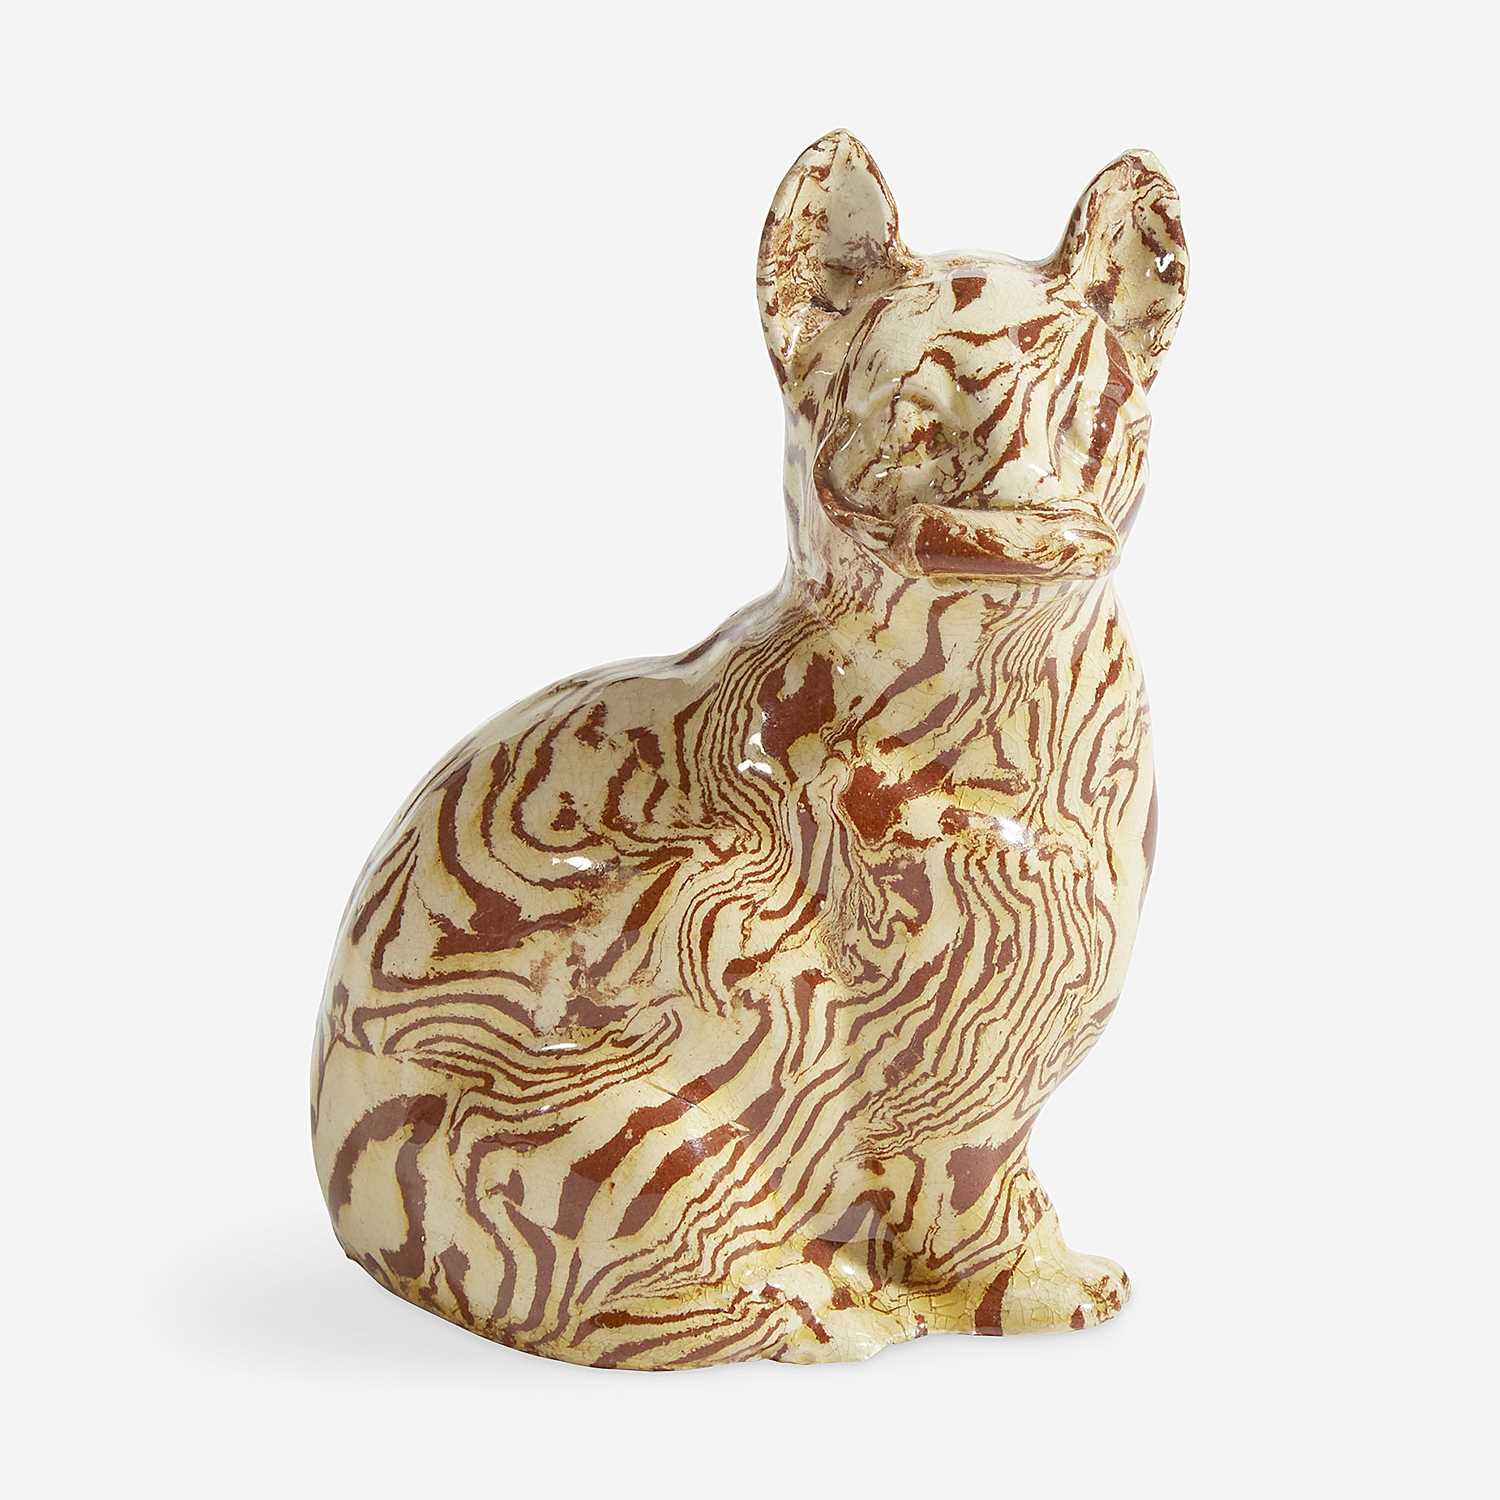 Lot 79 - A Staffordshire agateware figure of a cat with mouse